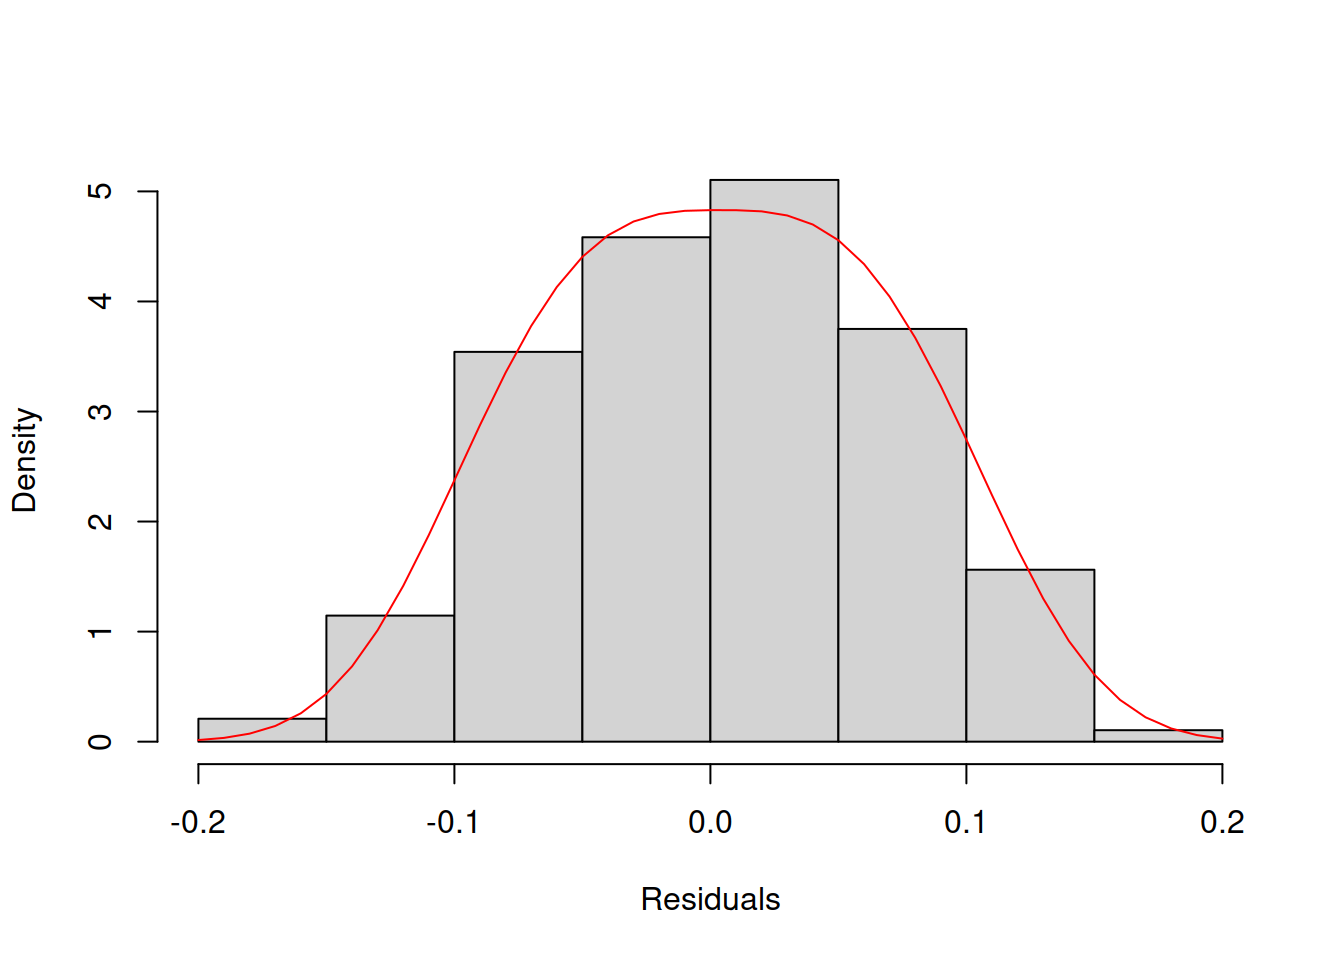 Histogram and density line for the residuals from model 17 (assumed to follow Generalised Normal distribution).